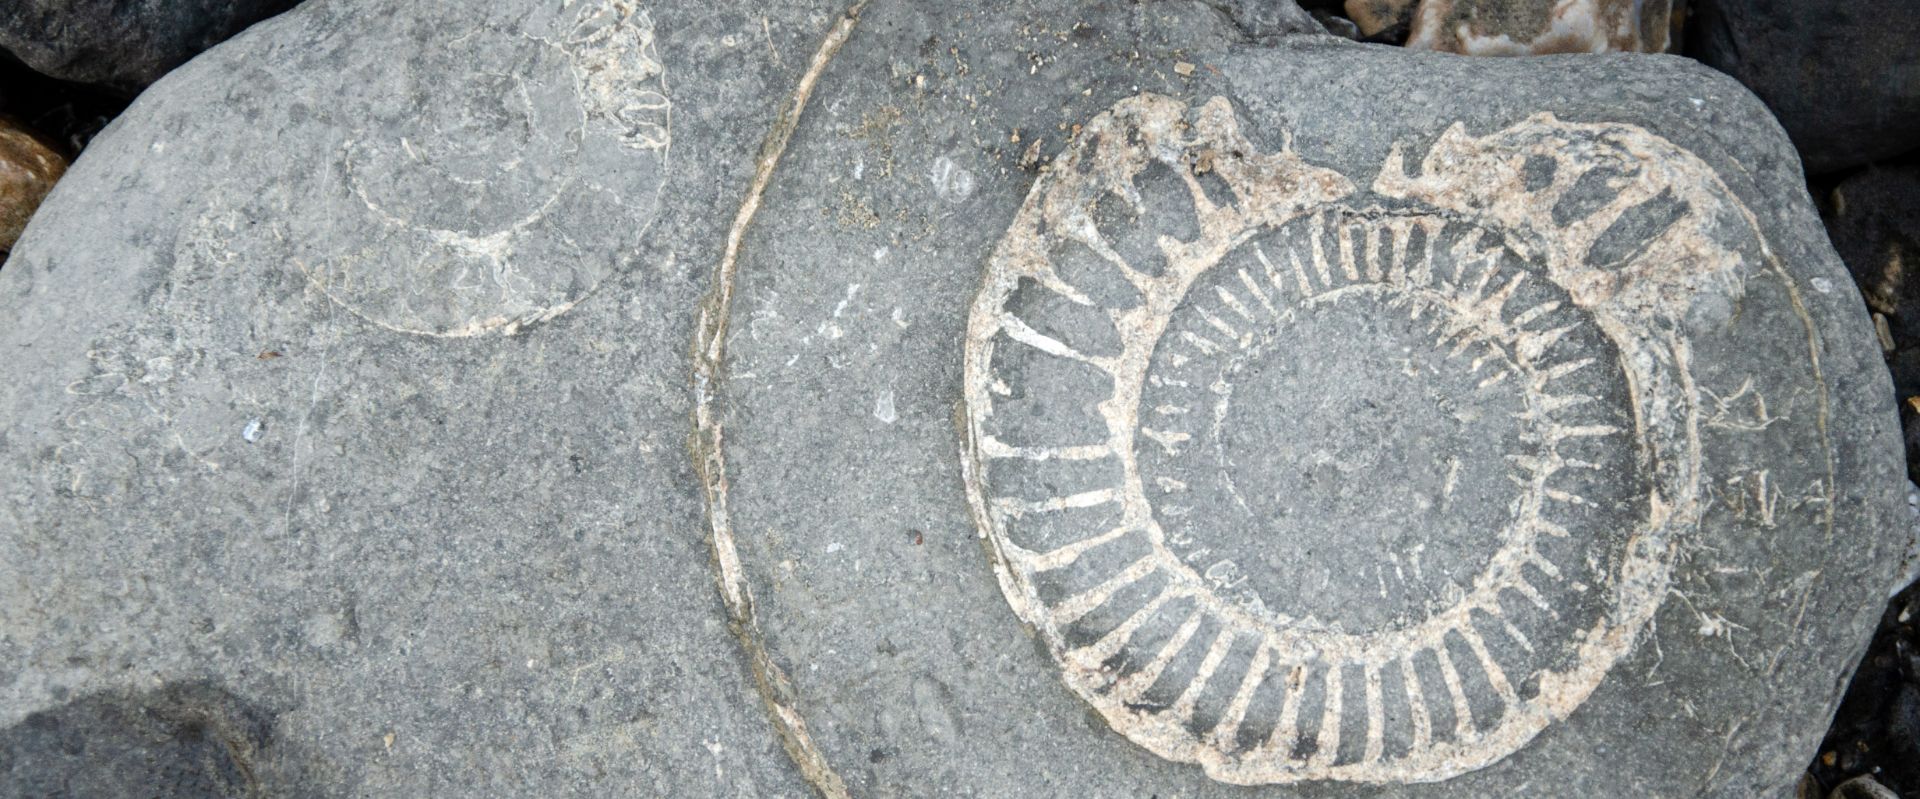 Fossil in the rock at Lyme Regis in Dorset